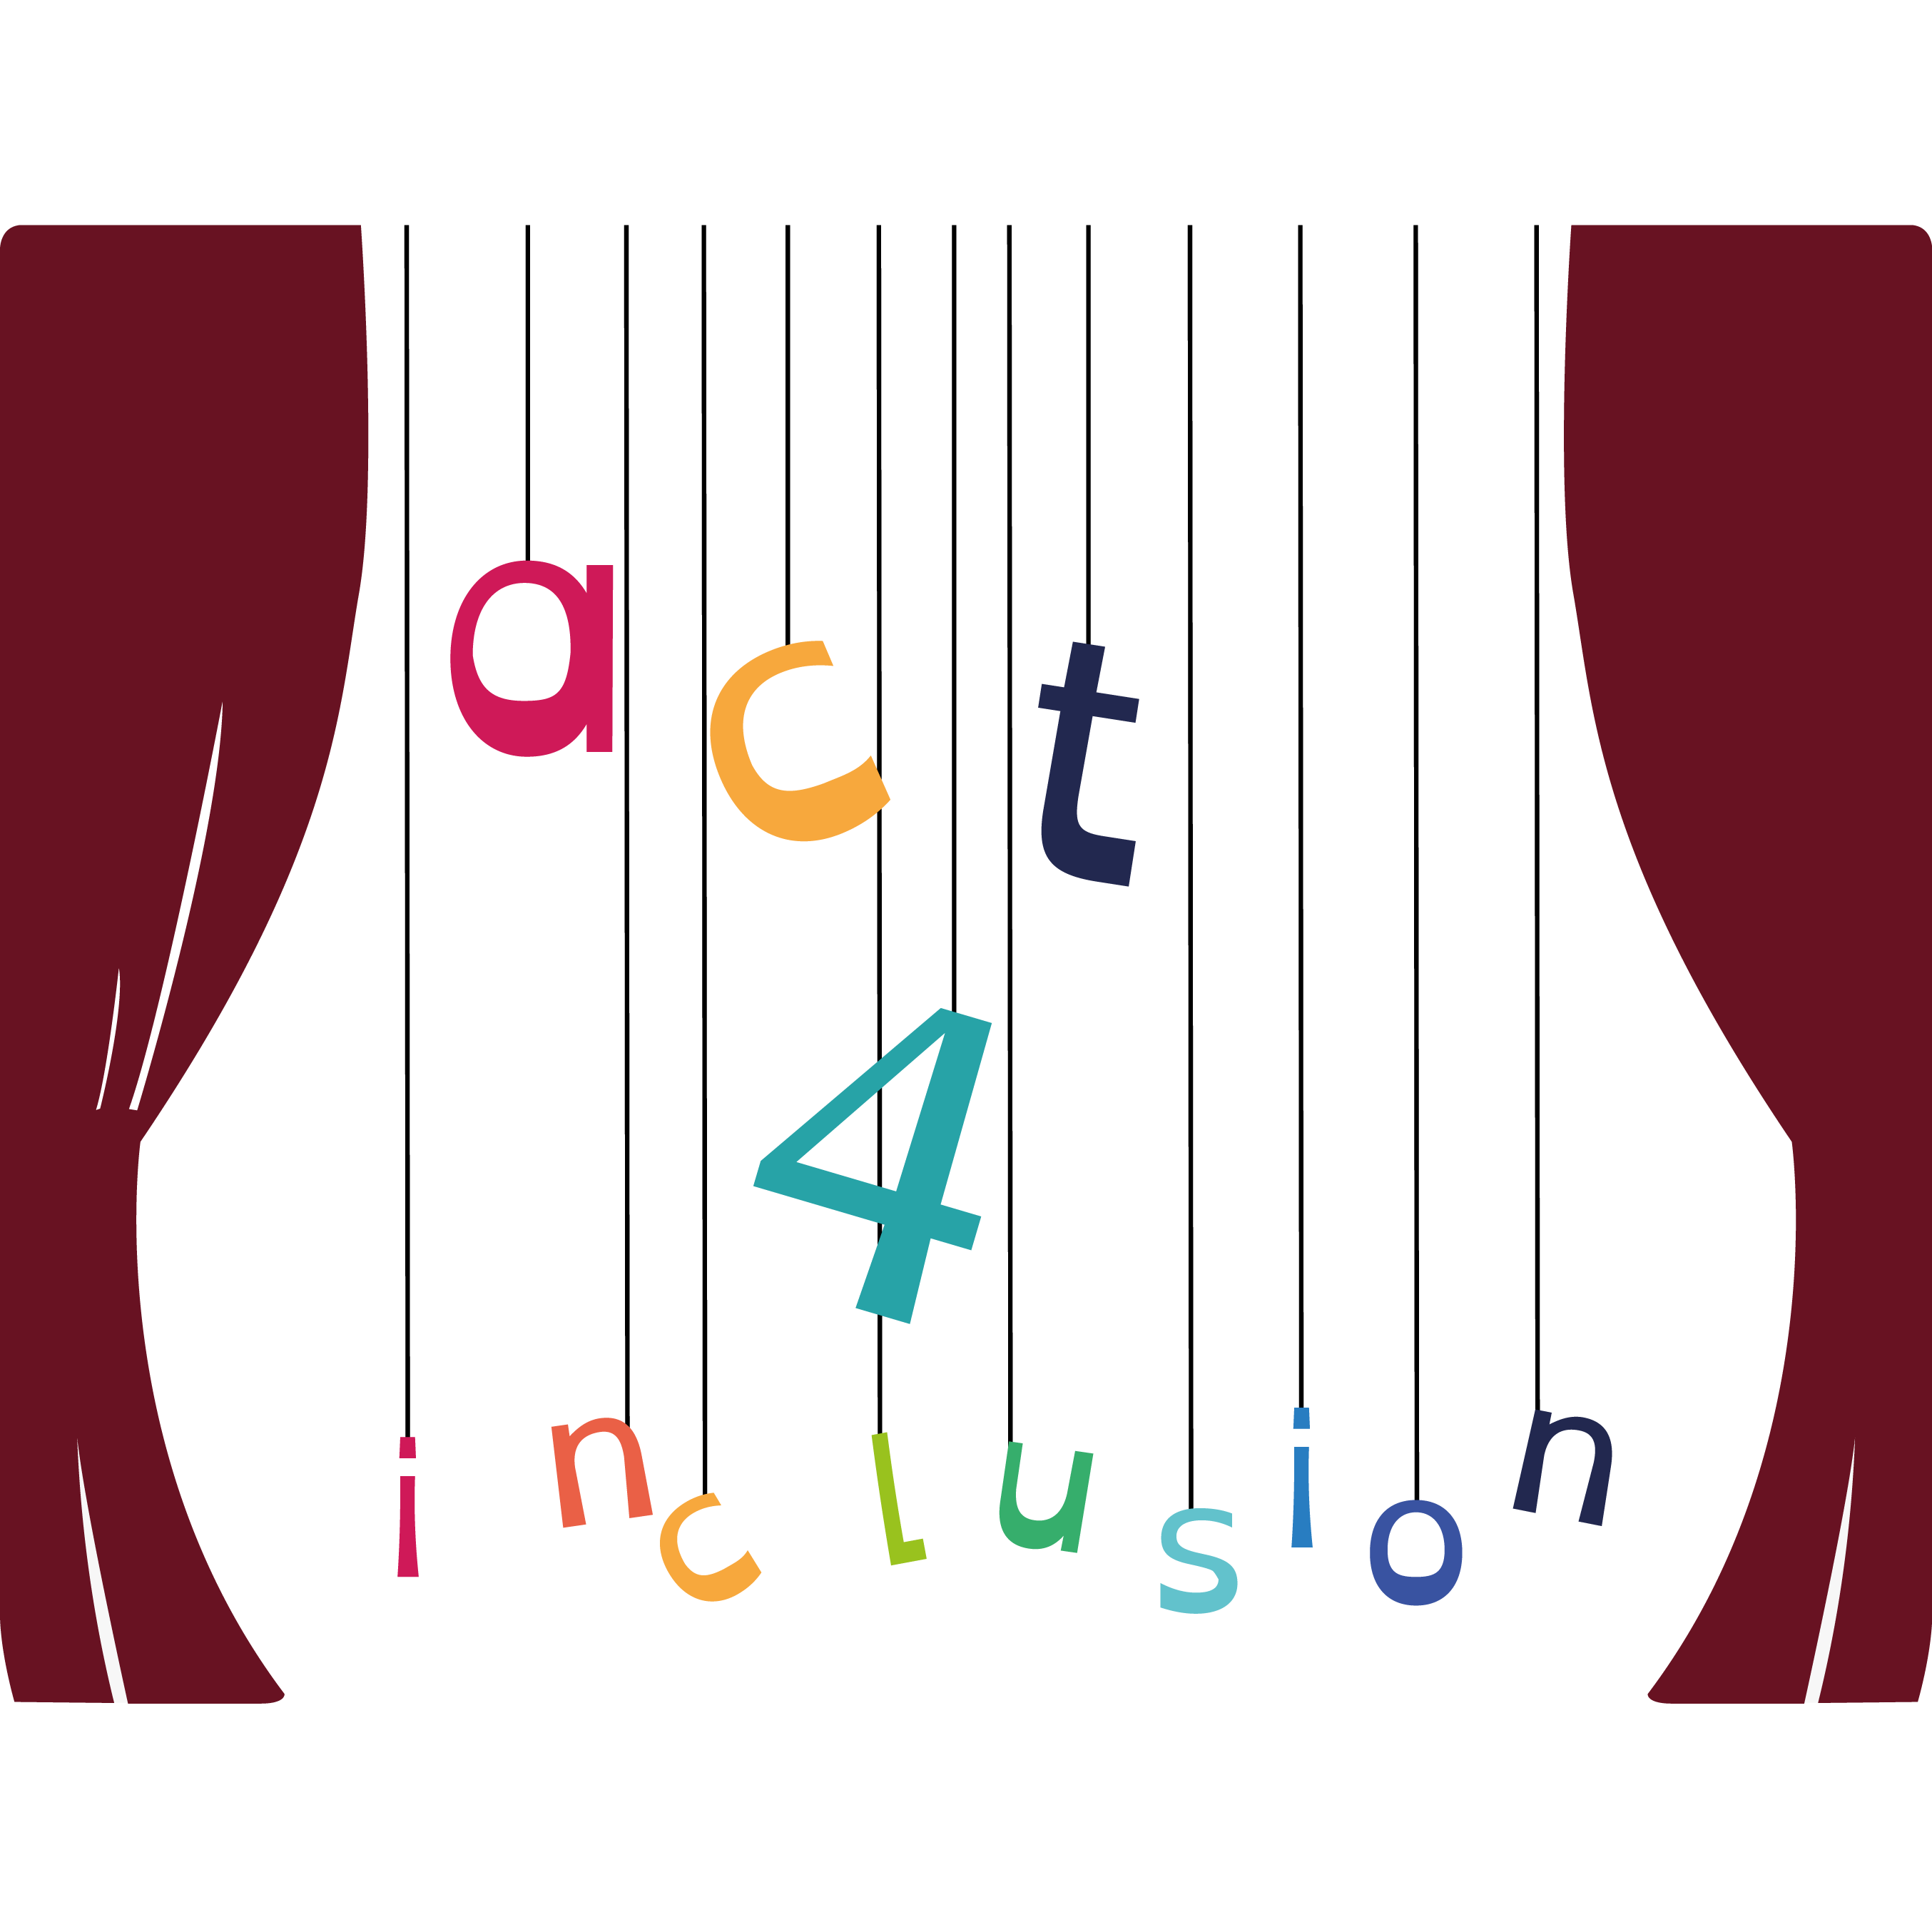 act4inclusion-01.png